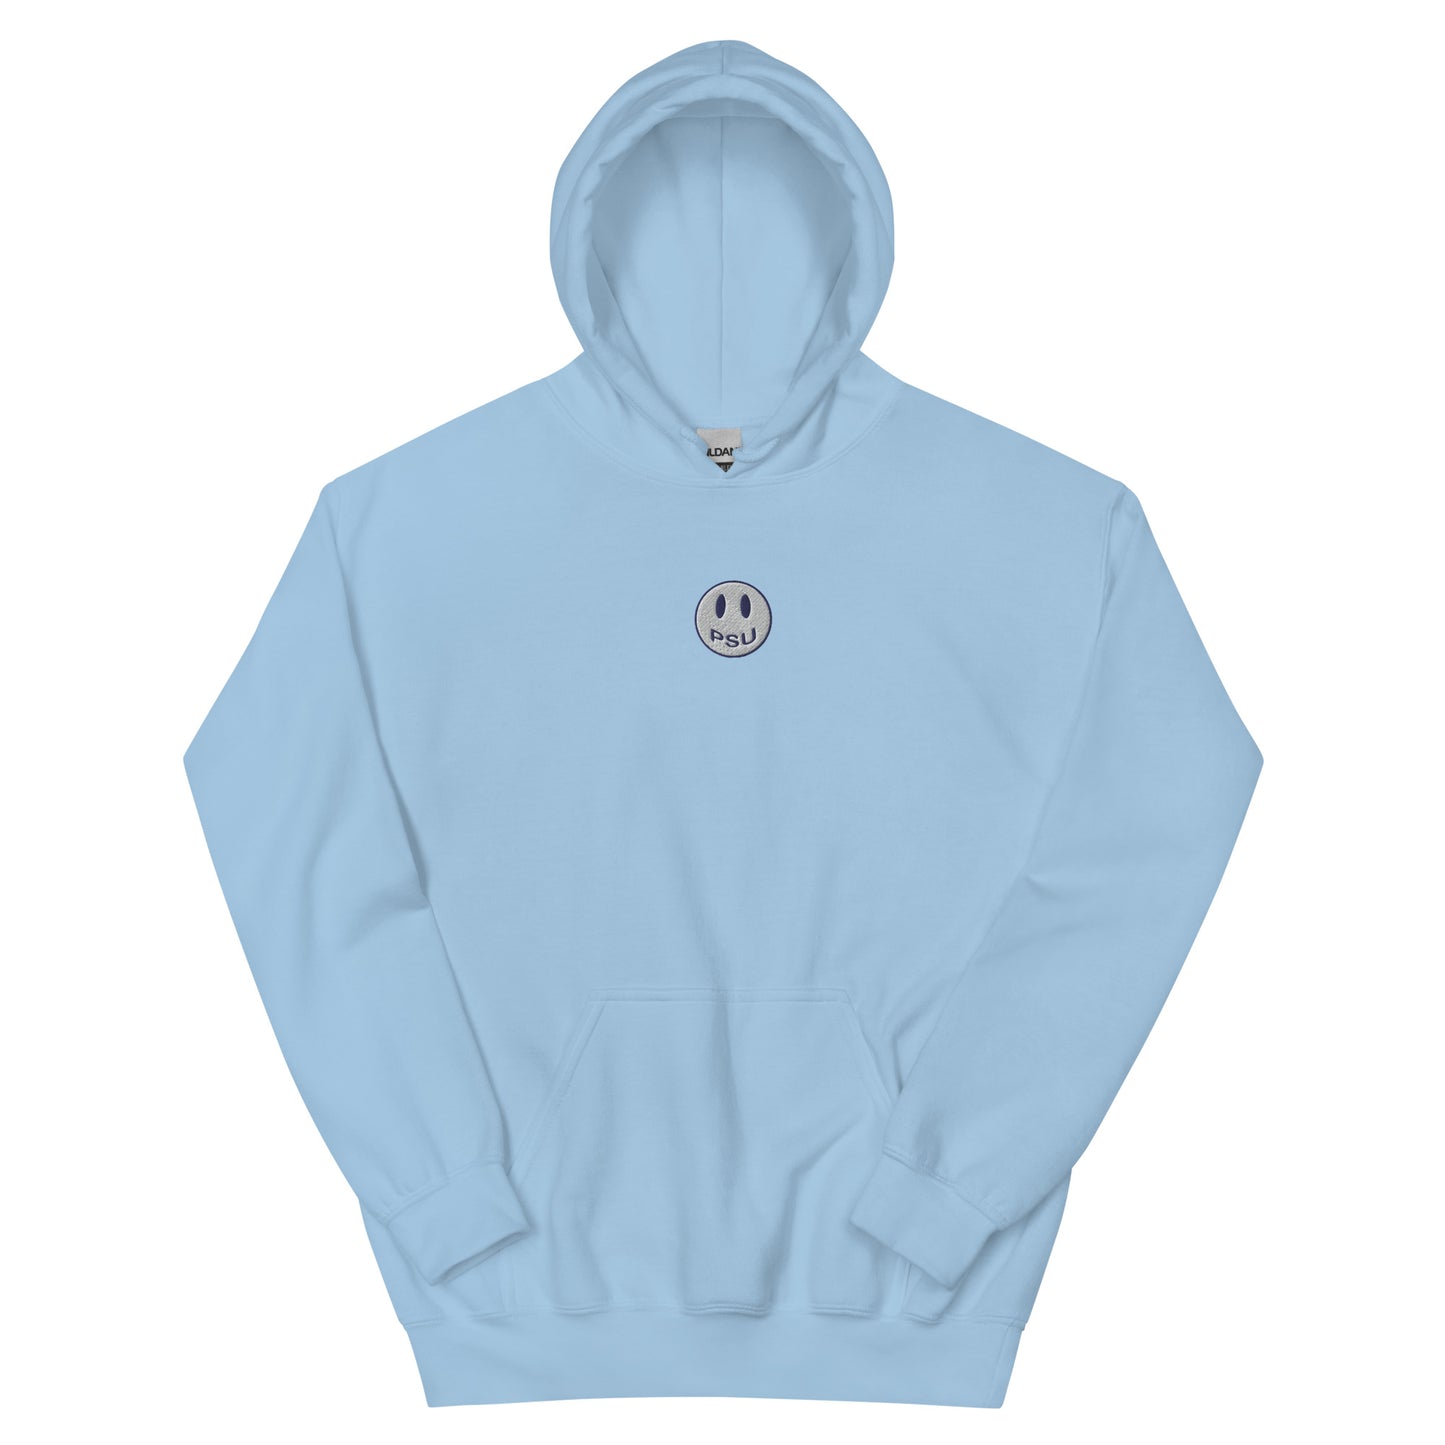 Embroidered Smiley Hoodie